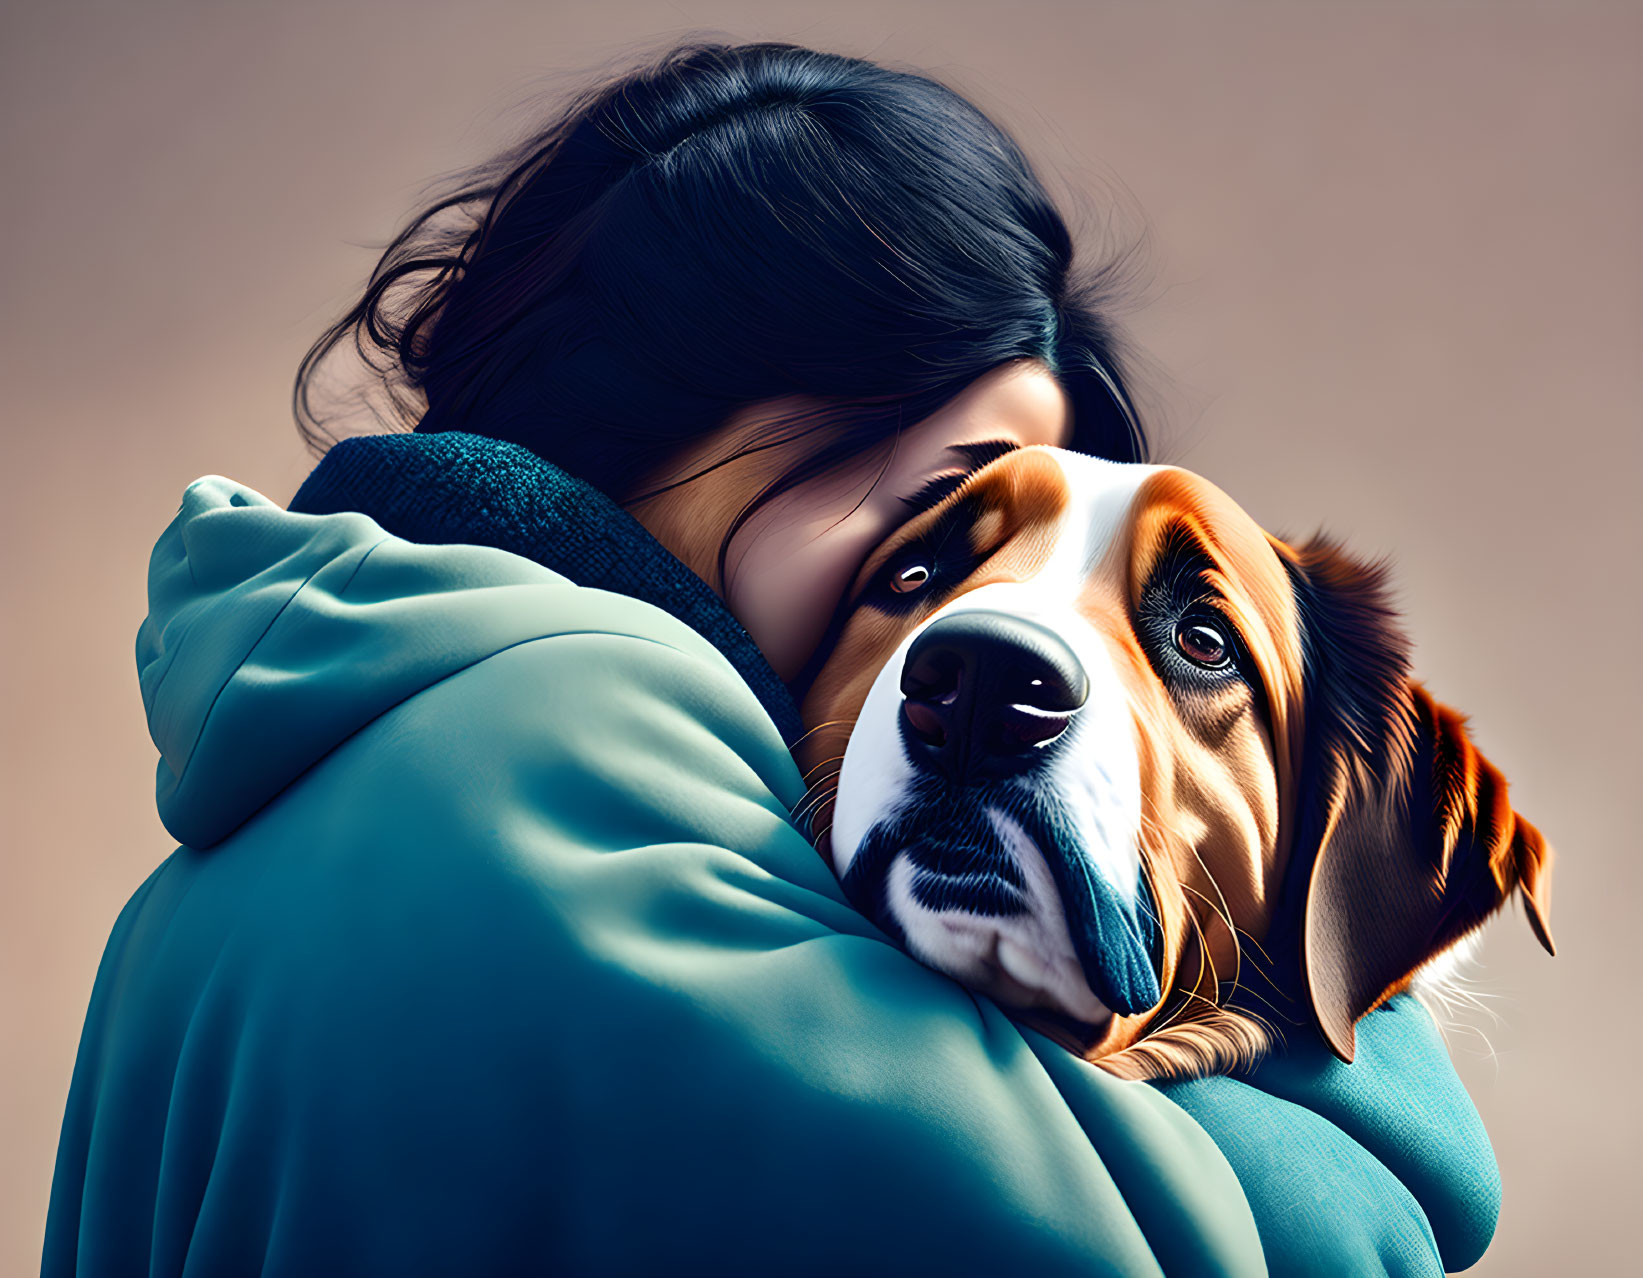 Woman in teal hoodie embracing calm brown and white dog